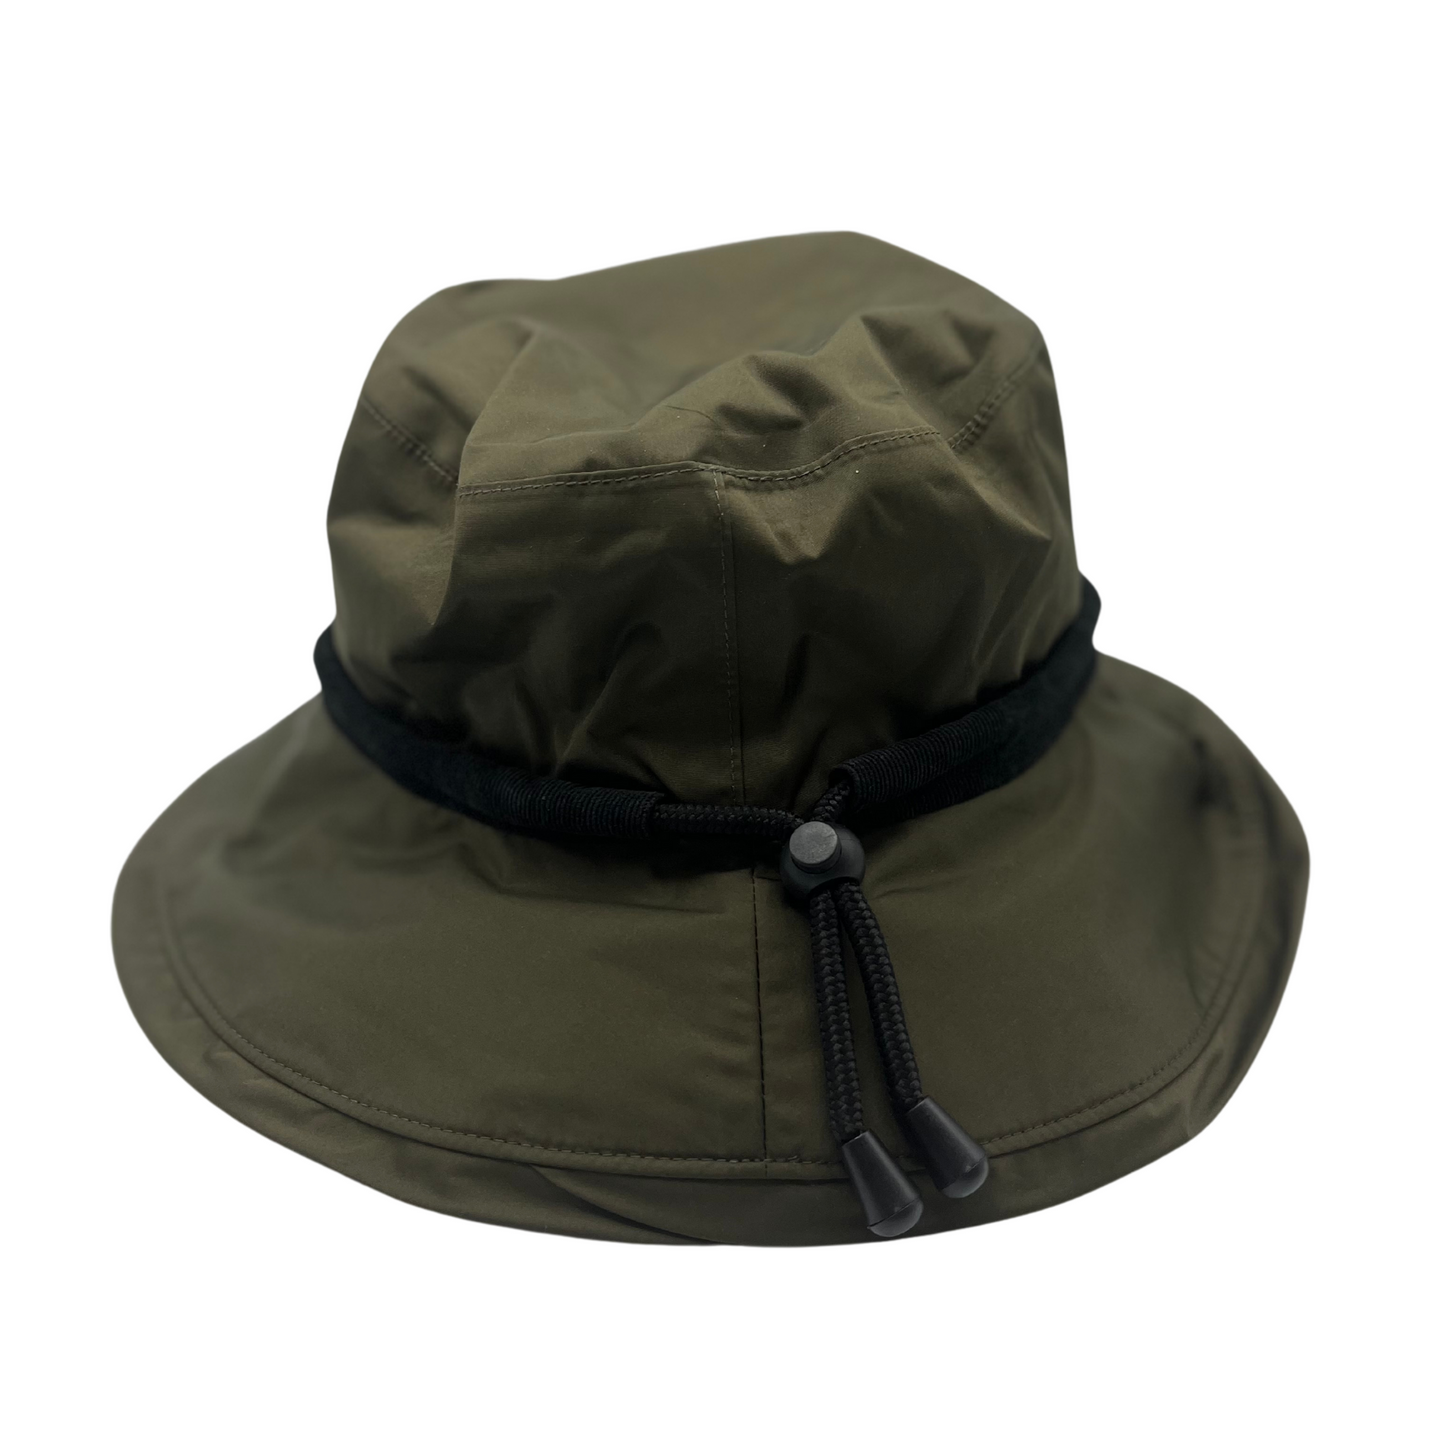 A front view of a green hat with a black drawstring.